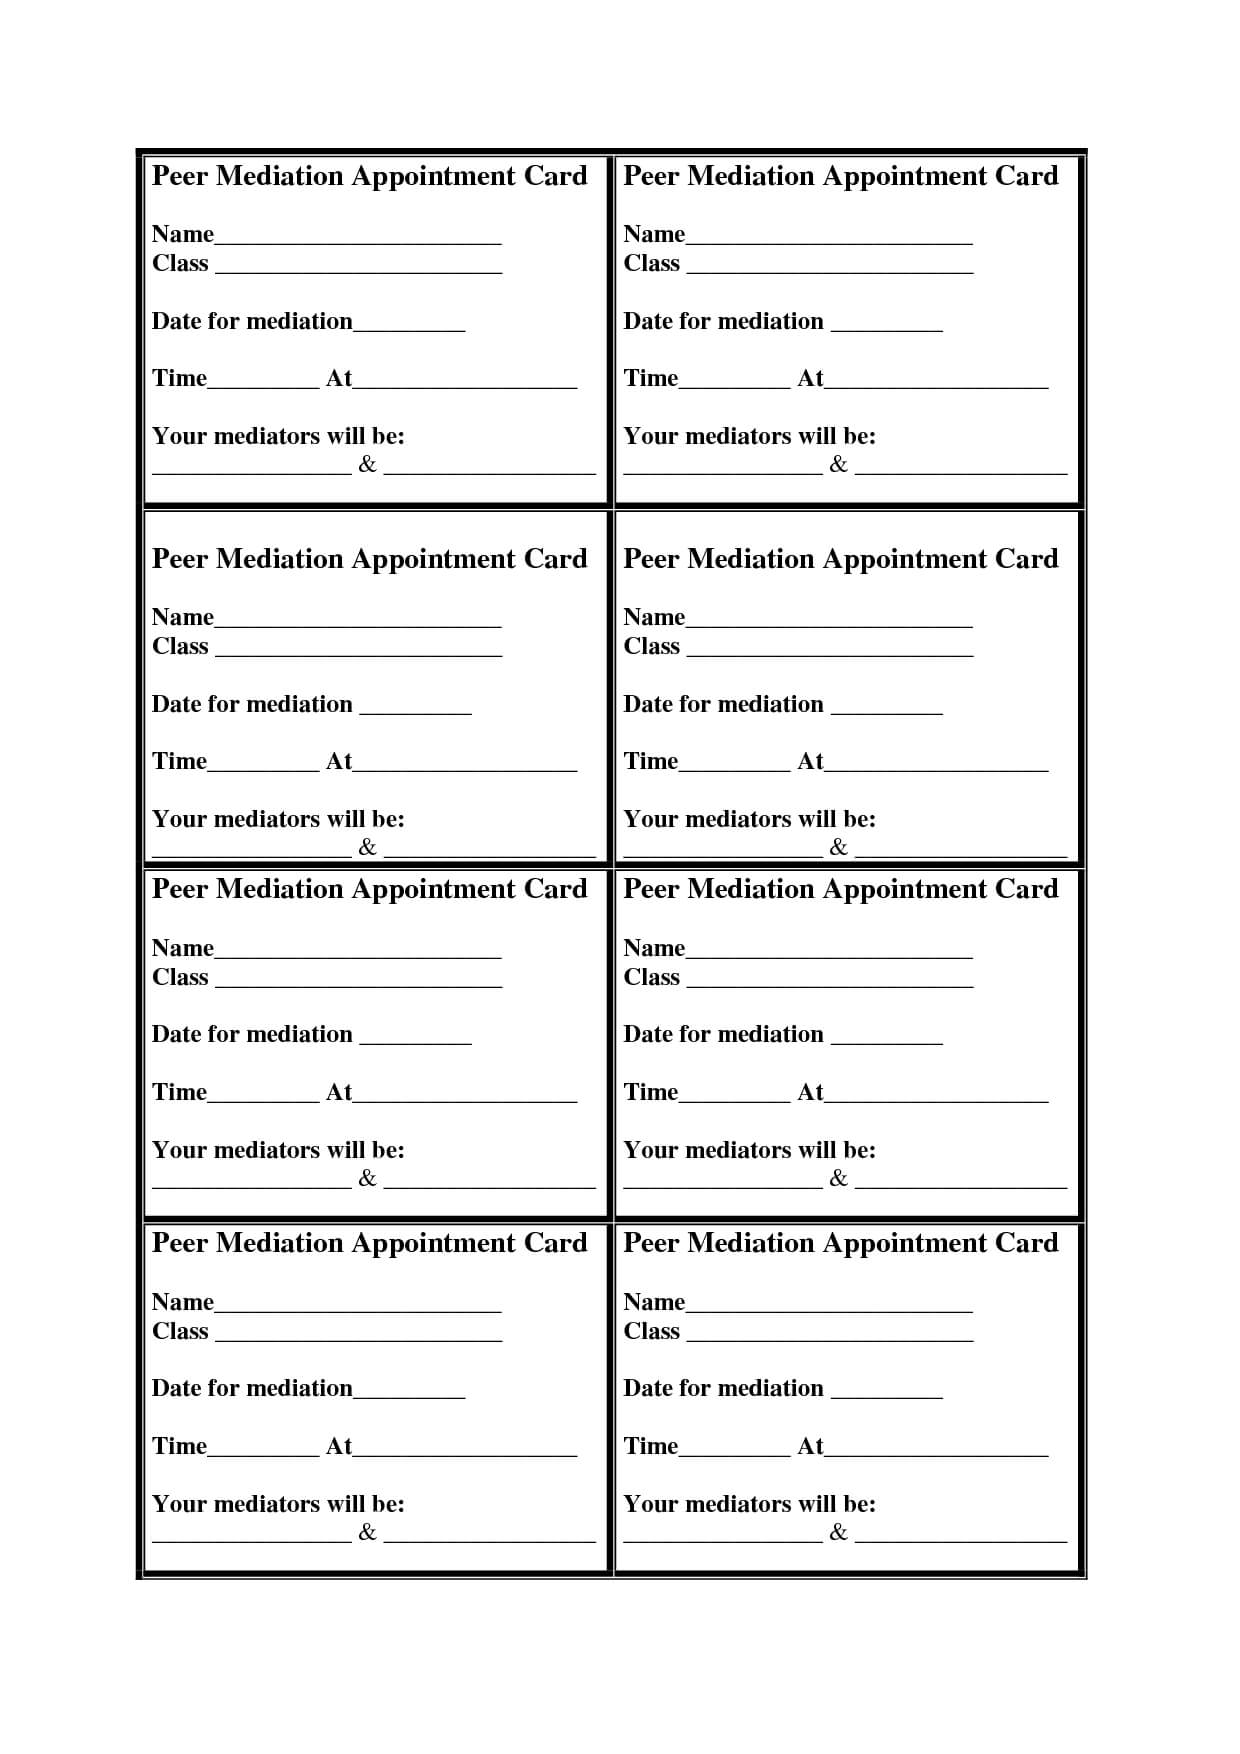 Appointment Cards Templates Free - Yatay.horizonconsulting.co Regarding Medical Appointment Card Template Free